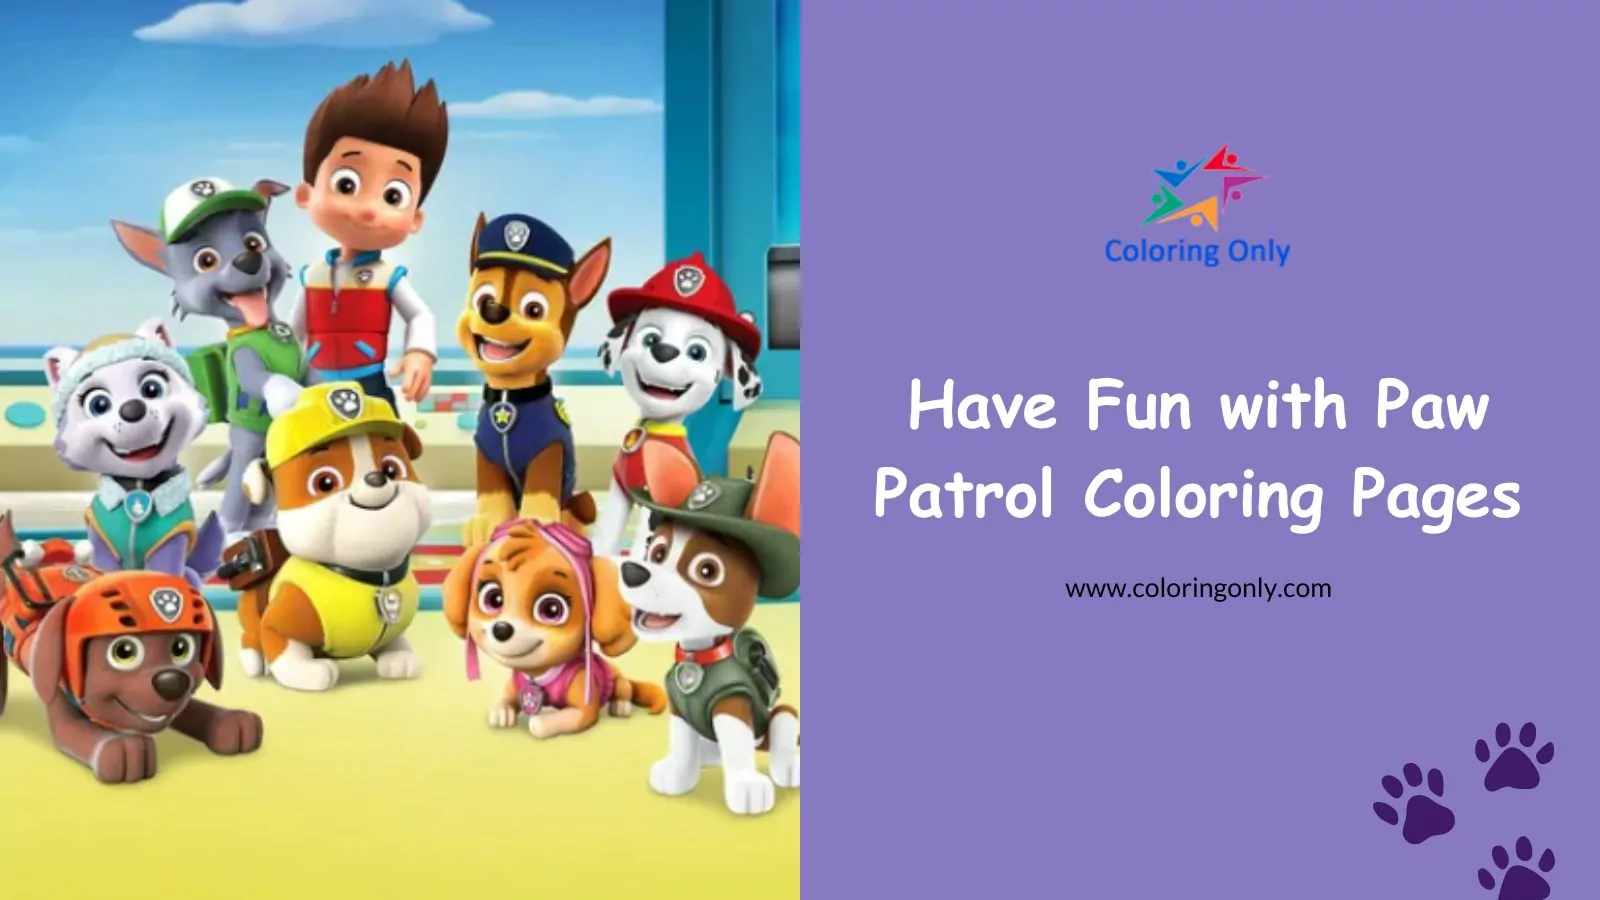 Have Fun with Paw Patrol Coloring Pages